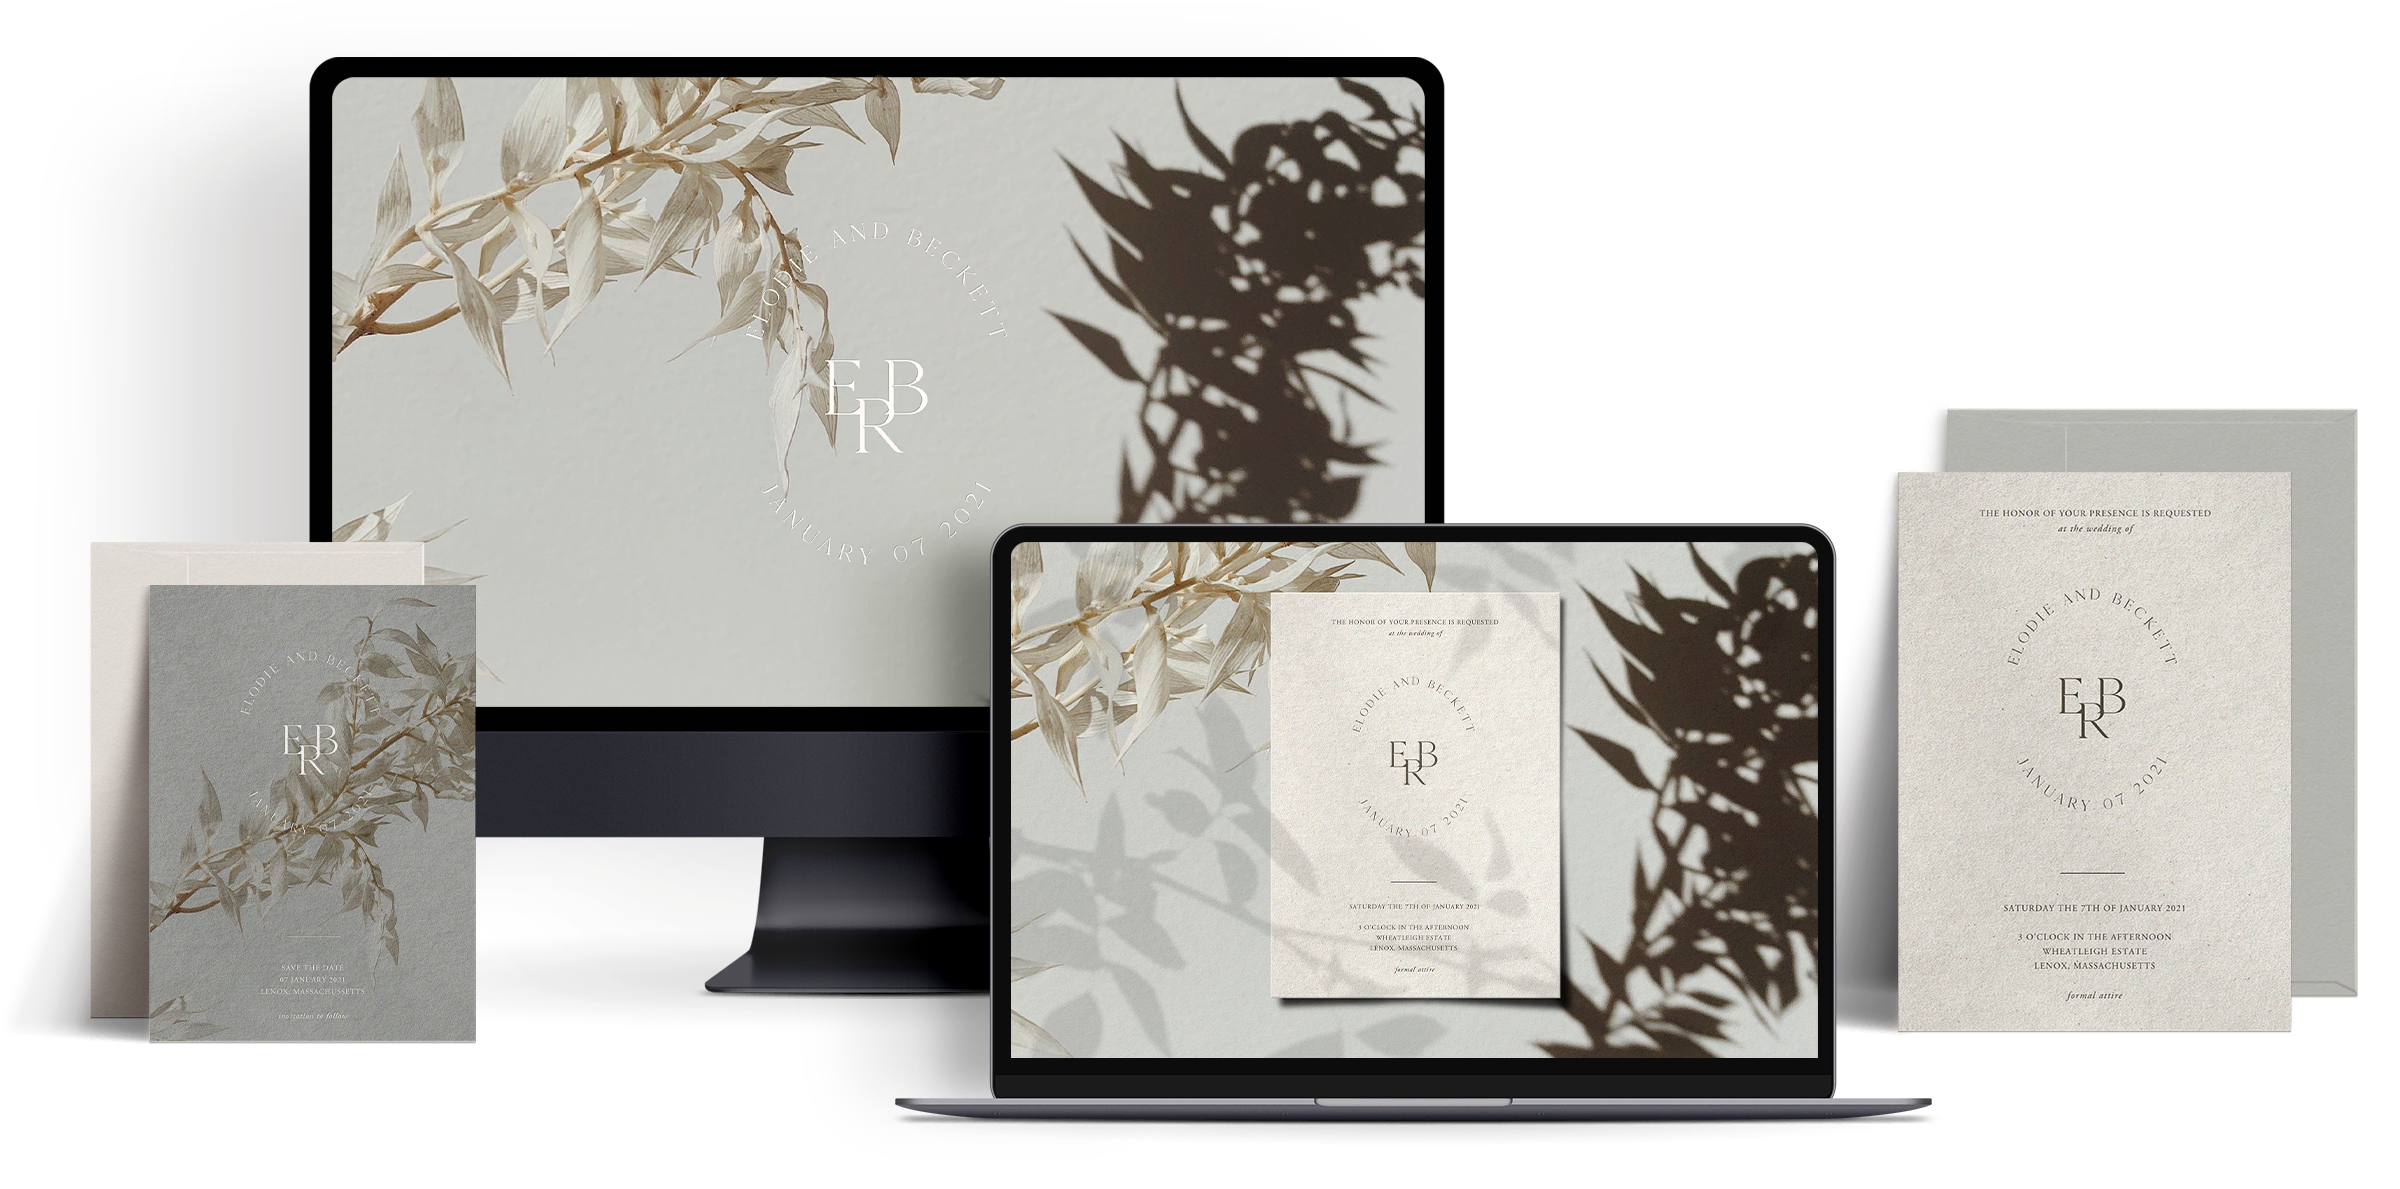 A monitor and laptop screen showing a floral wedding website and online invitation, and matching printed wedding invitations